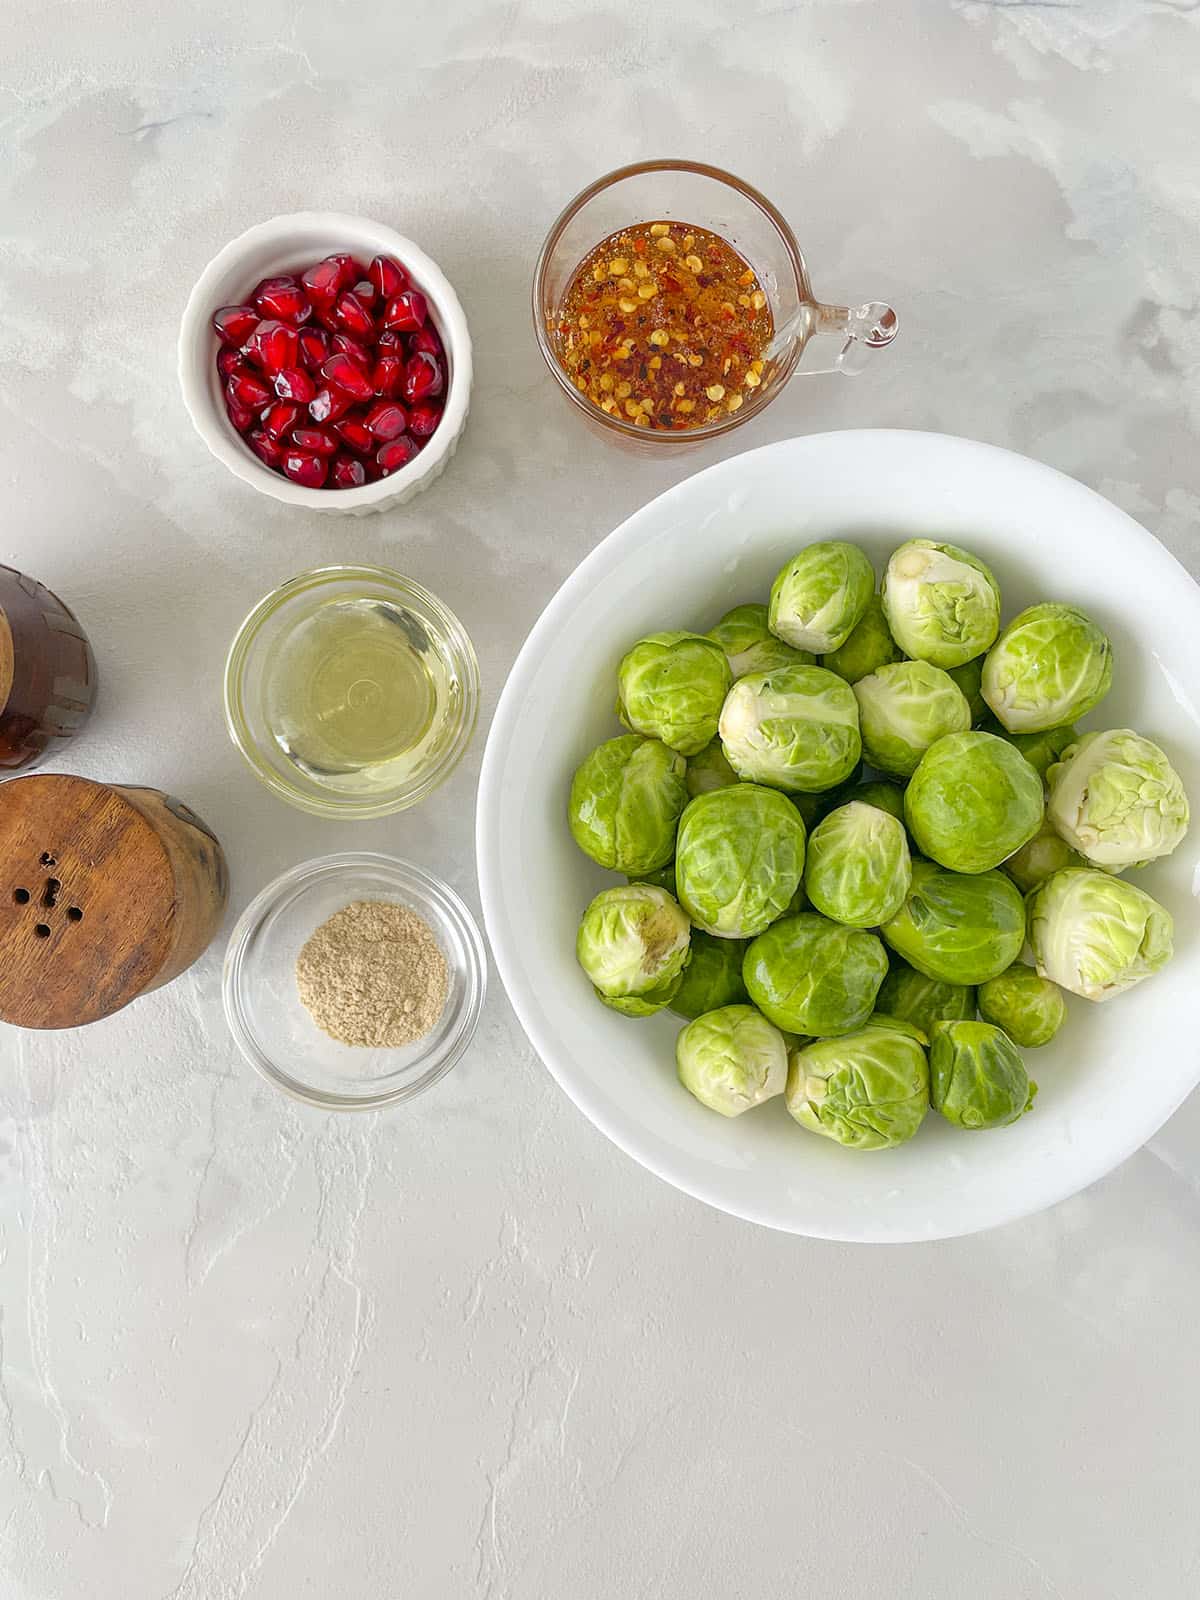 Ingredients for this dish such as brussels sprouts, garlic powder, hot honey, pomegranate ariels, oil and salt and pepper.